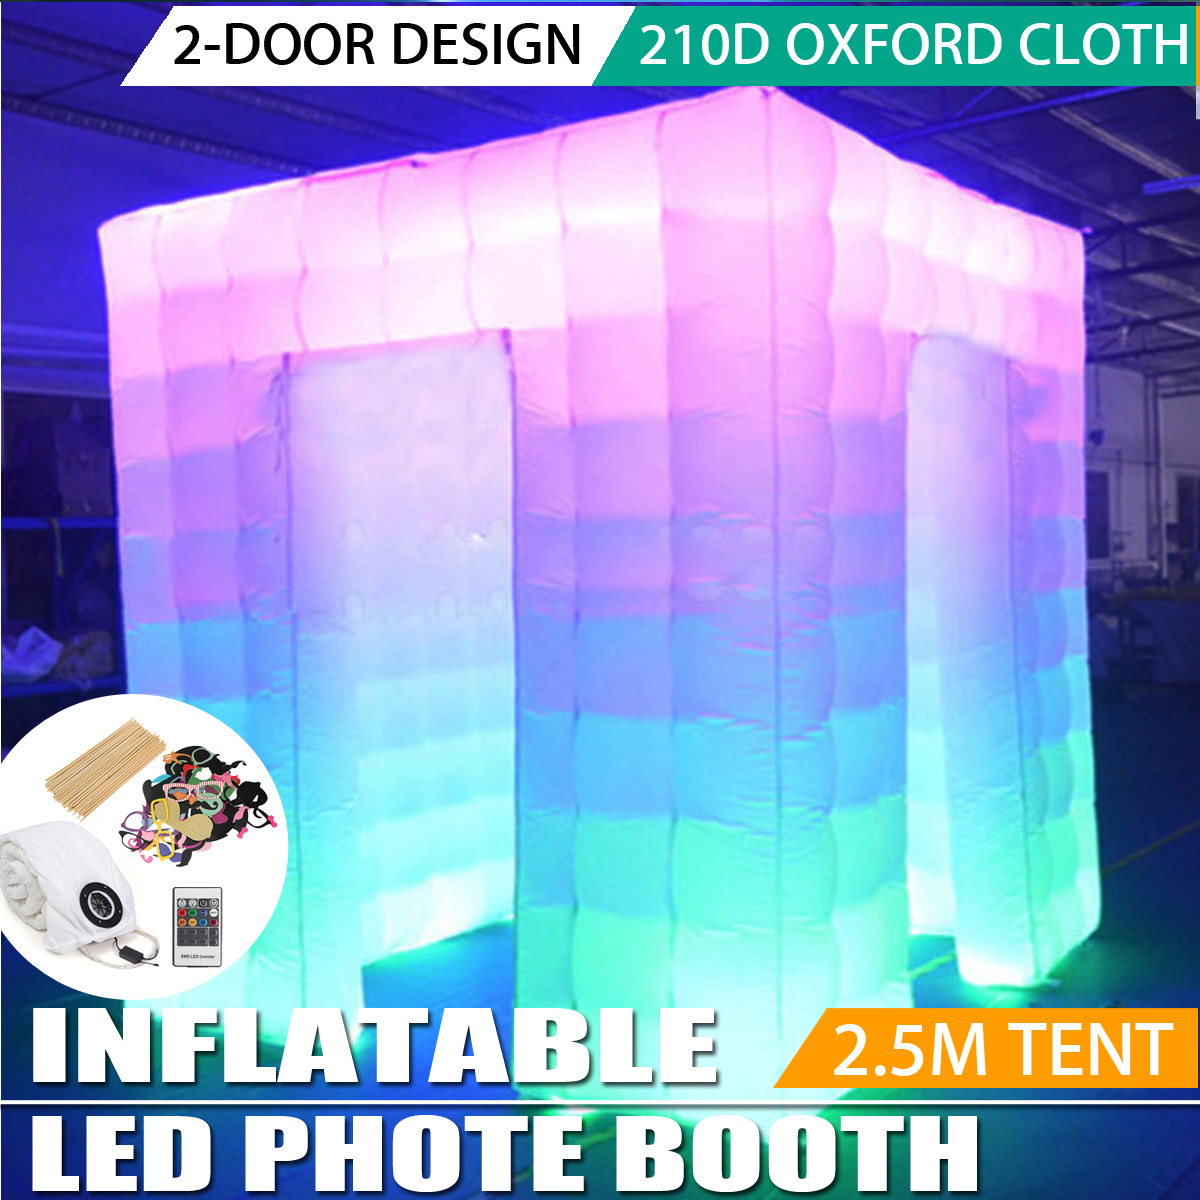 110V-82ft-Two-Door-Multi-color-LED-Inflatable-Photo-Booth-Enclosure-Tent-with-Remote-Control-Air-Ten-1145648-1